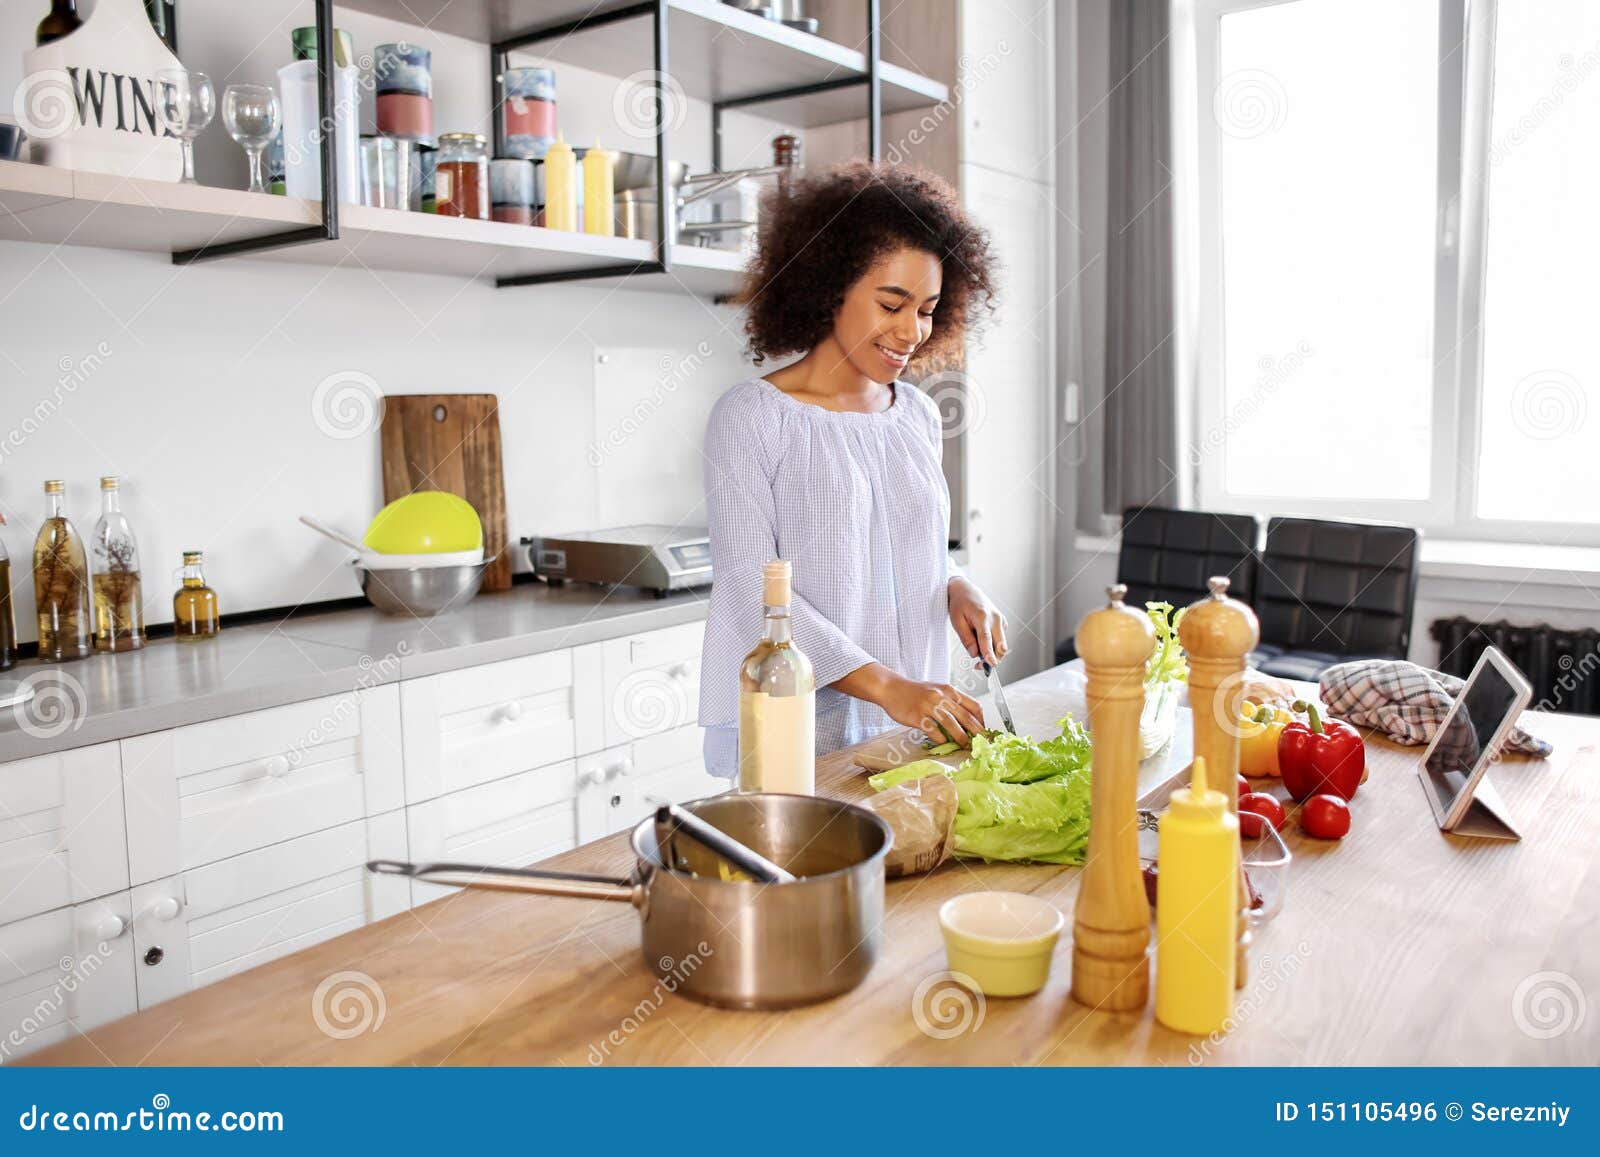 https://thumbs.dreamstime.com/z/young-african-american-woman-cooking-kitchen-young-african-american-woman-cooking-kitchen-151105496.jpg